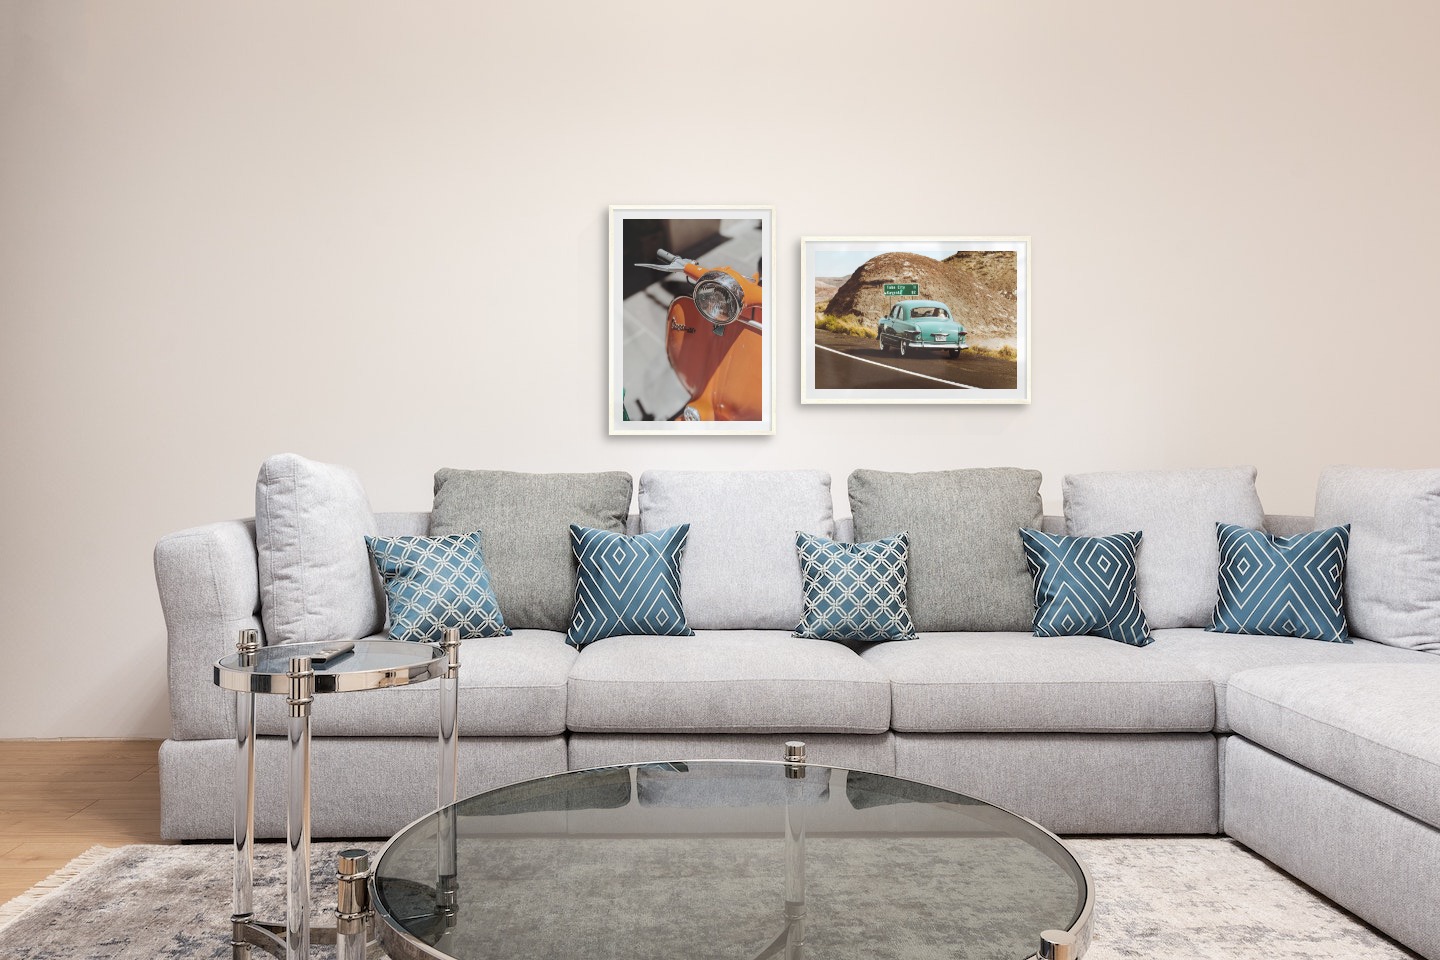 Gallery wall with picture frames in light wood in sizes 50x70 with prints "Orange vespa" and "Car on the road"